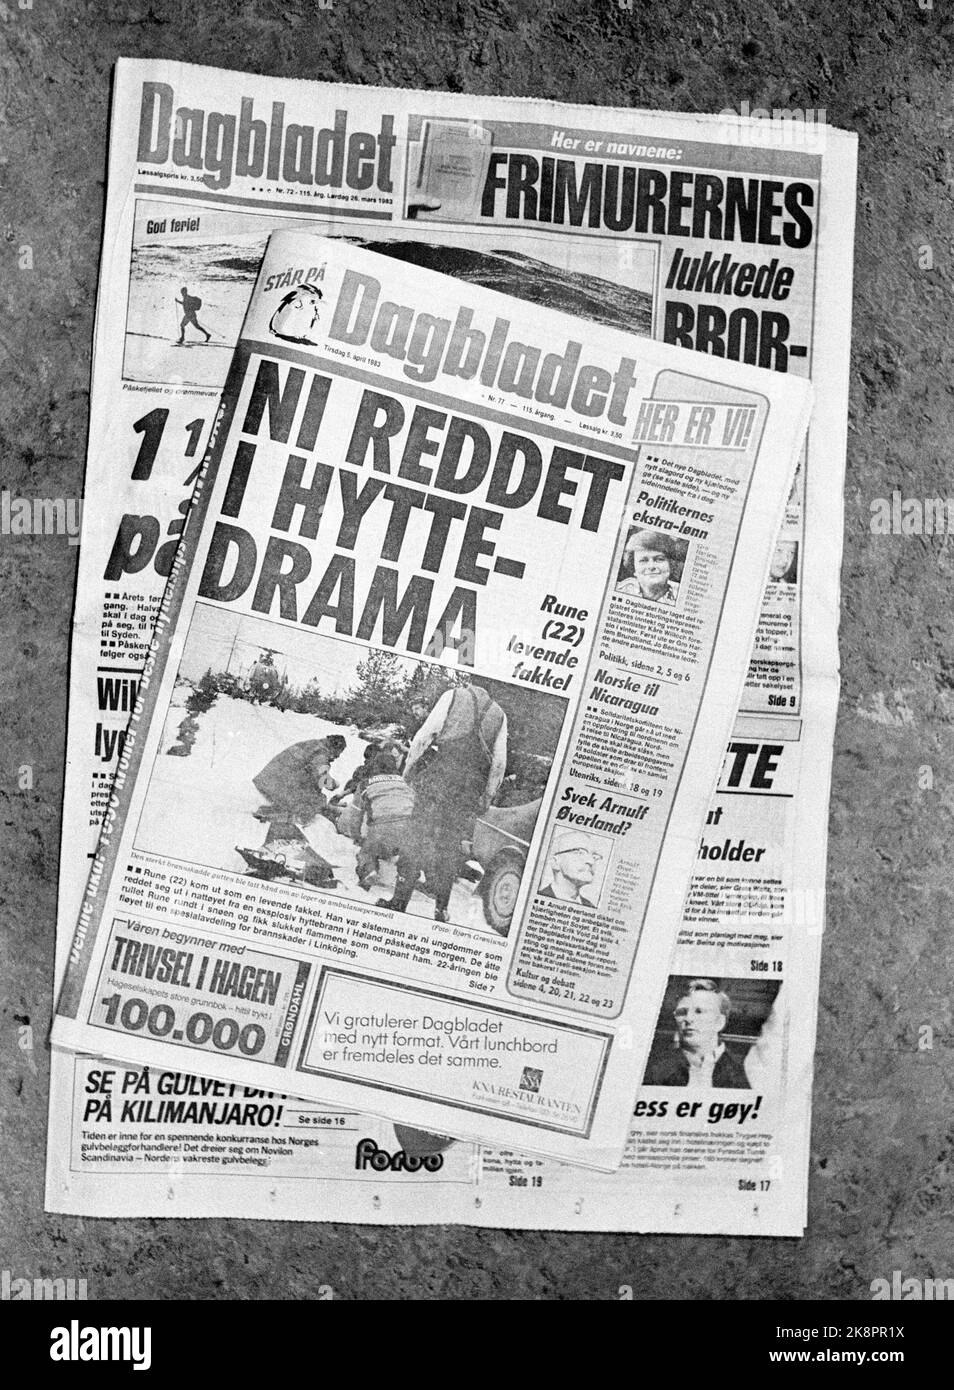 Oslo 1983-04: The newspaper Dagbladet shrinks in format. On Saturday, April 2, 1983, the latest edition of the newspaper came out in its old form, and on Tuesday, April 5, the newspaper's first issue in Tabloid Format was published. (The cover page: 'Nine rescued in cabin drama'. Stock Photo